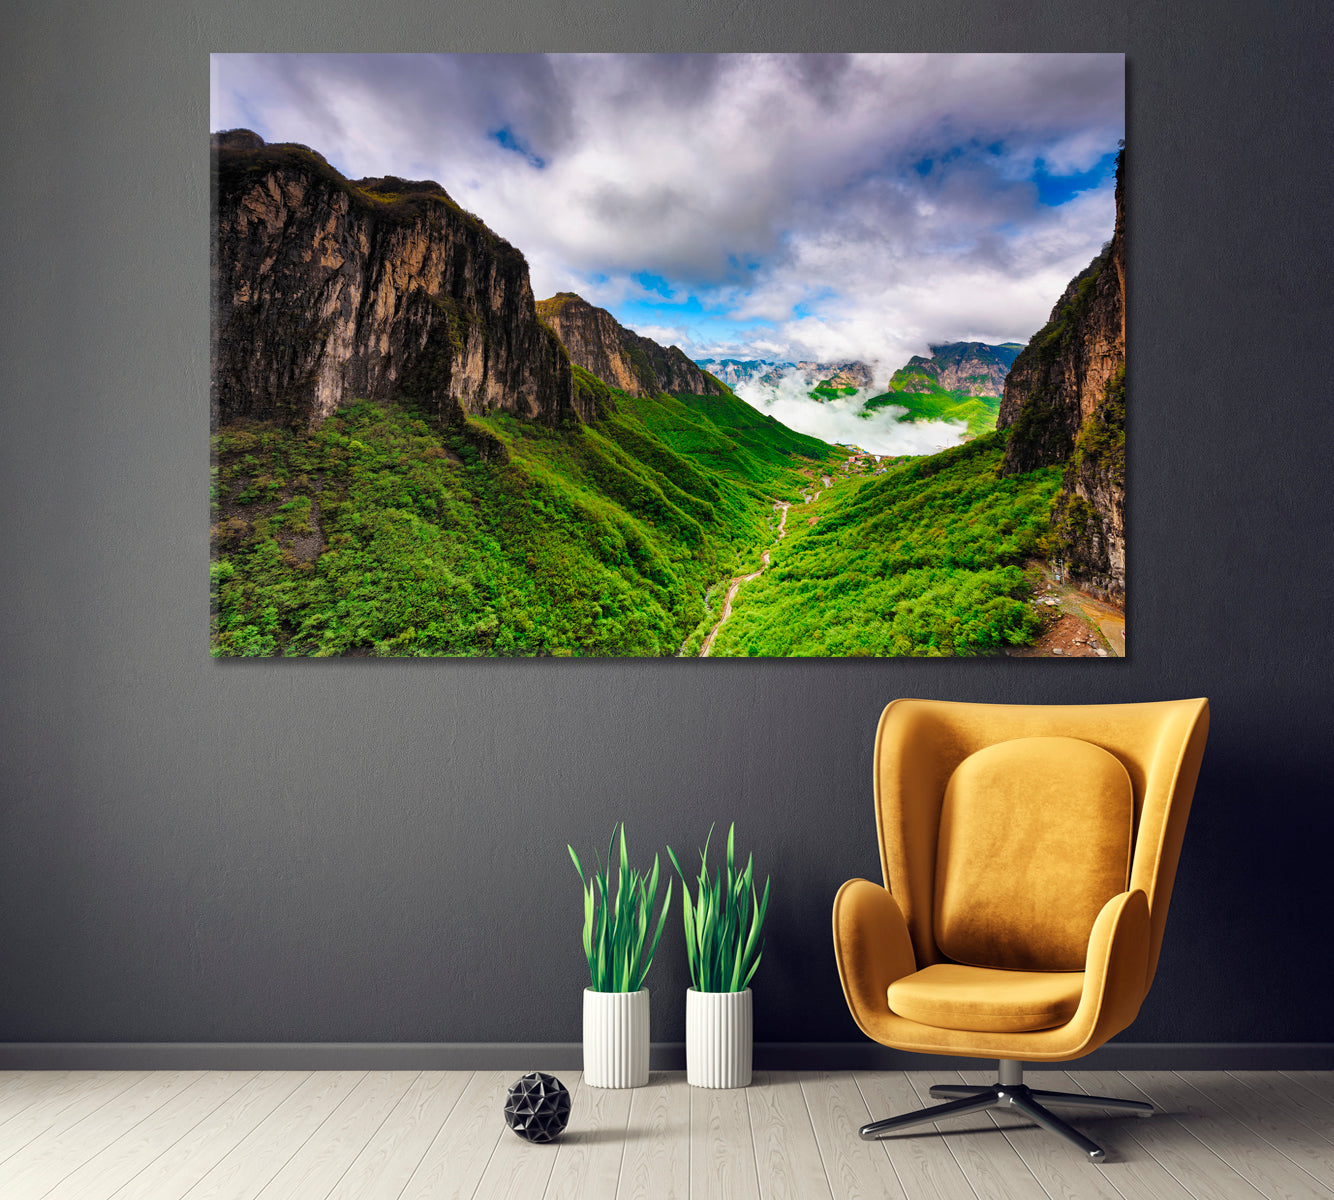 Stunning Mountain Landscape China Canvas Print ArtLexy 1 Panel 24"x16" inches 